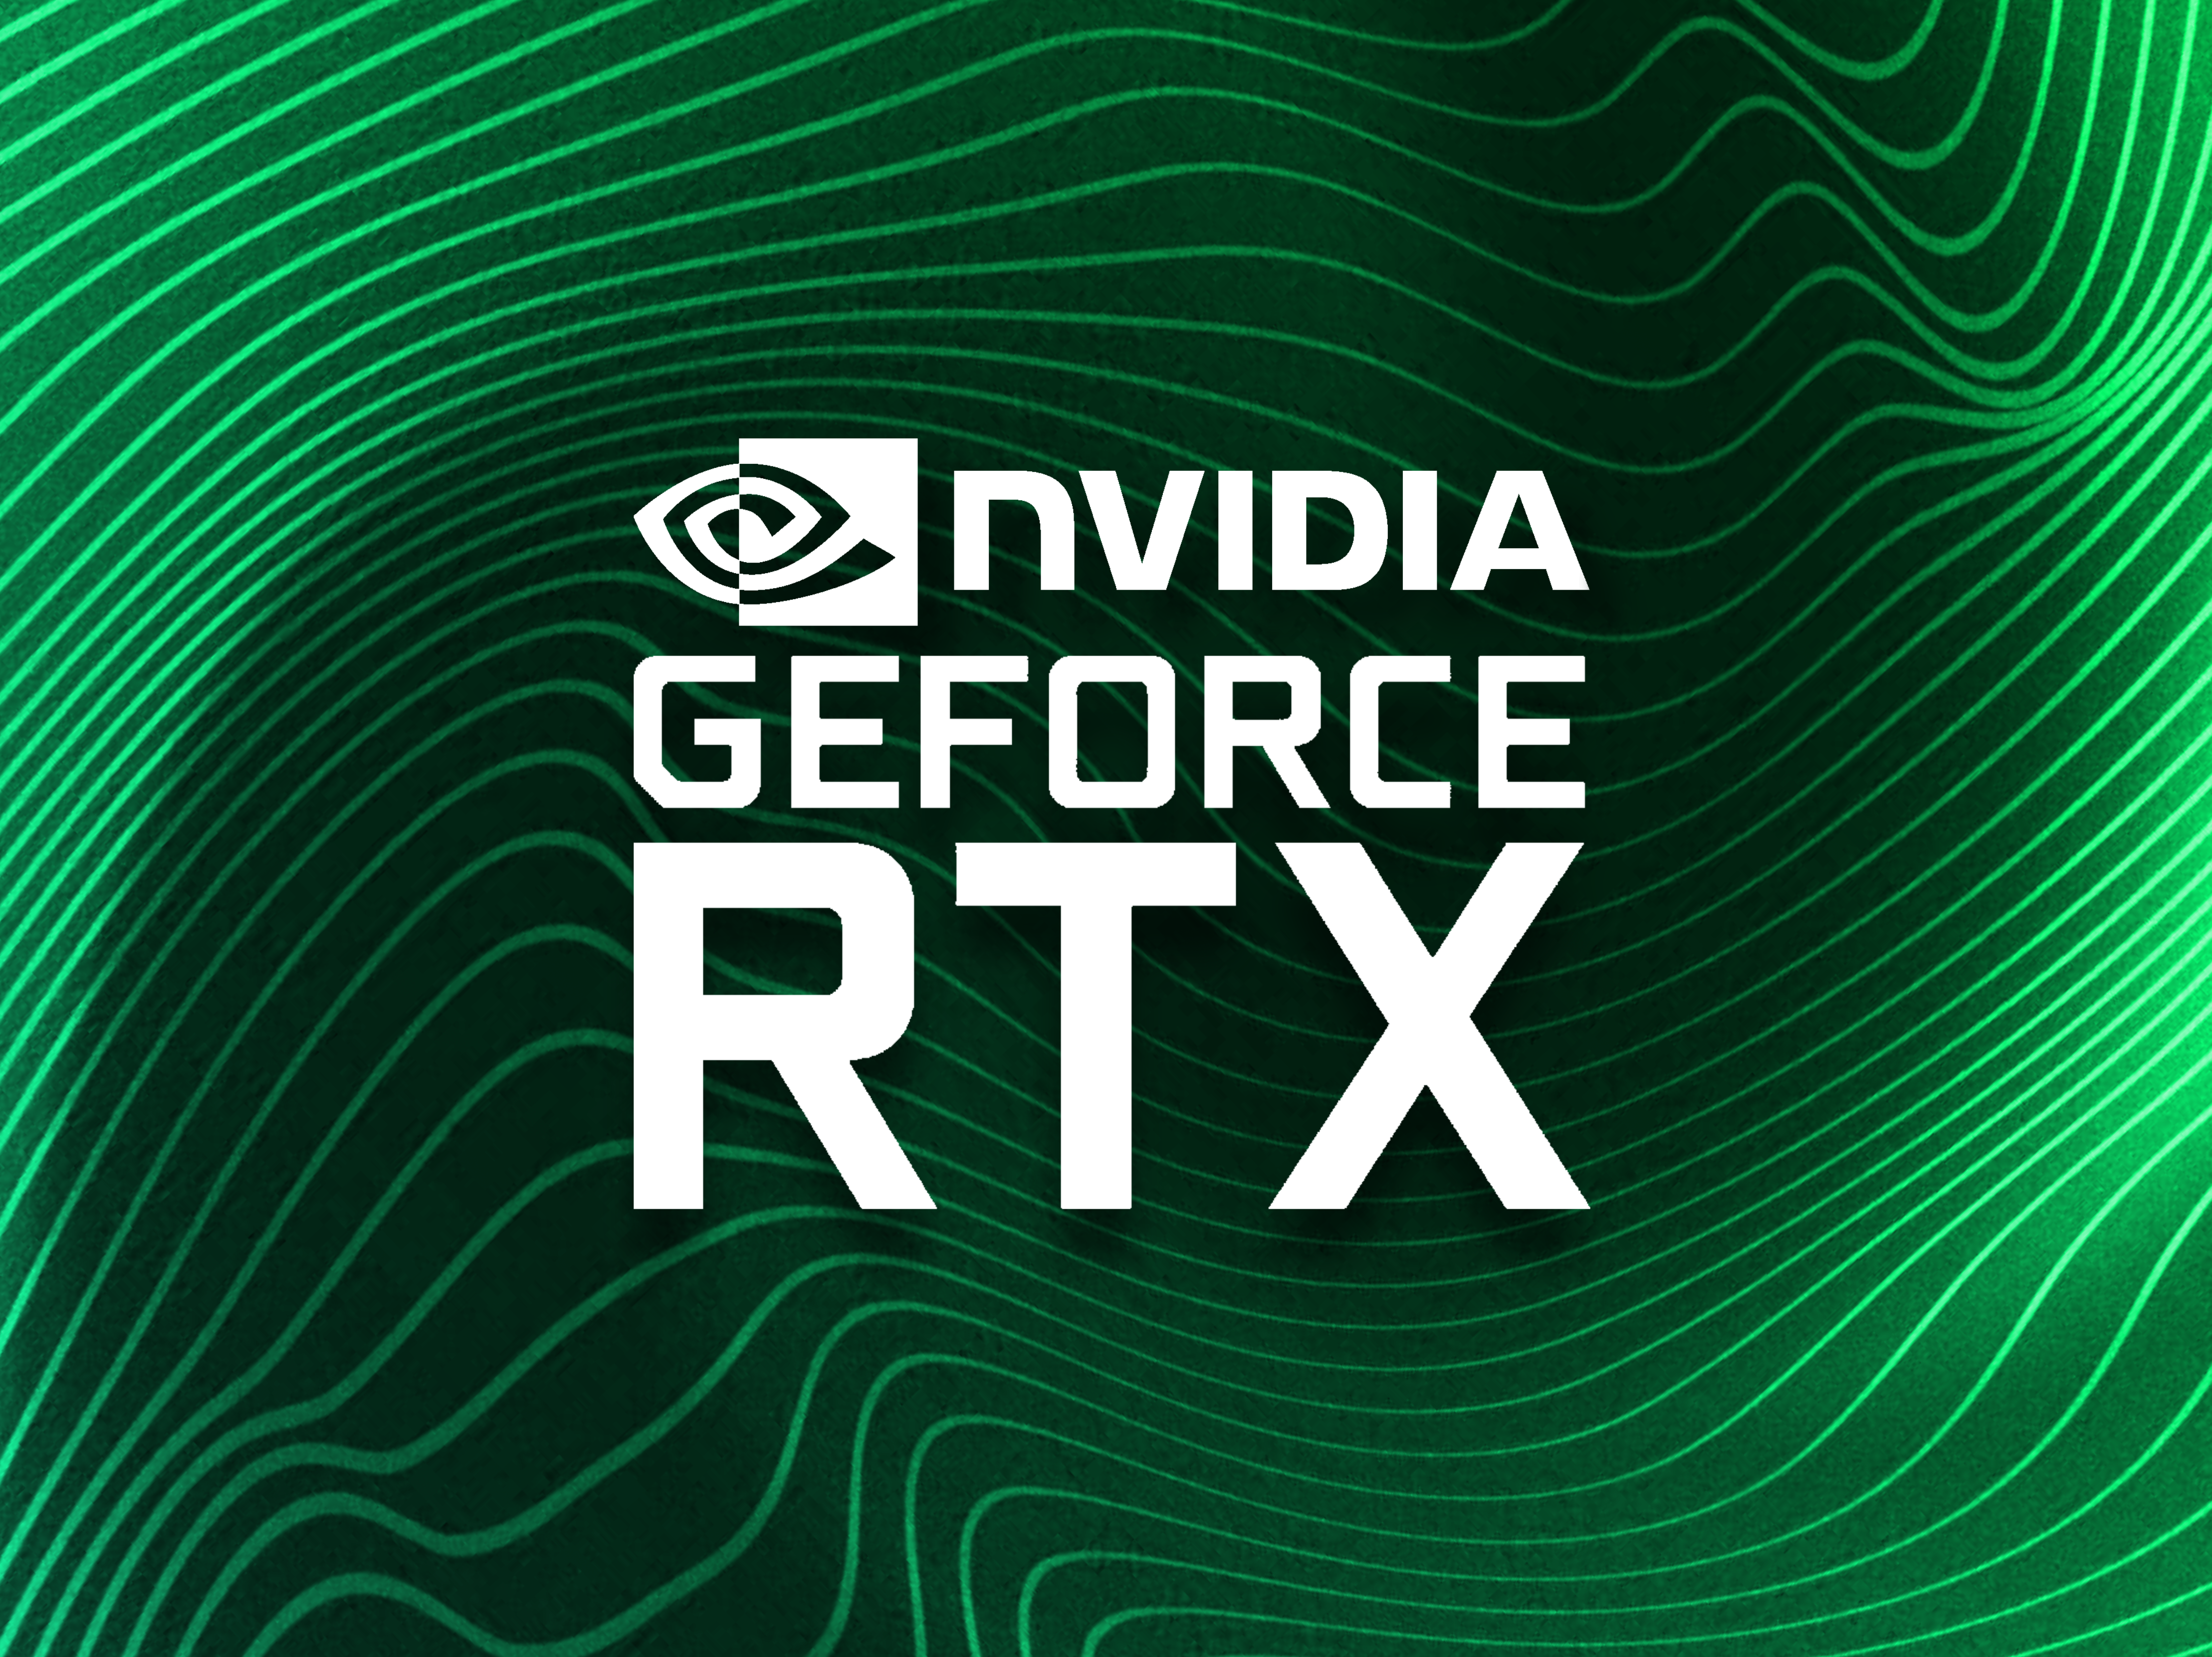 Nvidia has announced GeForce RTX 3050 and 3050 Ti GPUs for Laptops